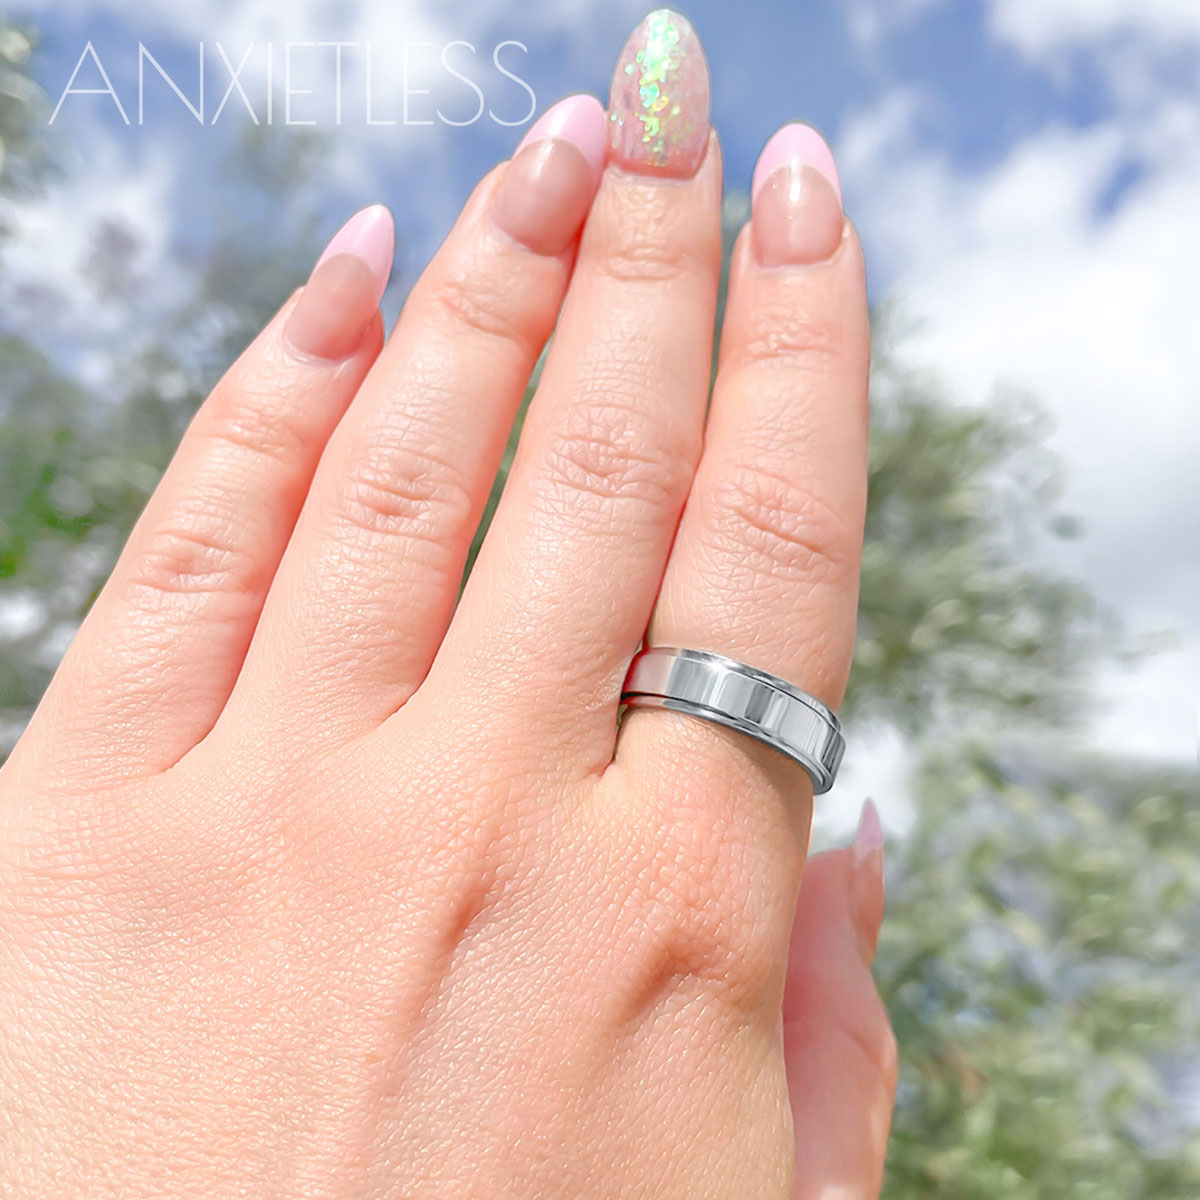 Girl with pink nails wearing a silver fidget ring, featuring a smooth polished design, with blurry trees and sky in the background